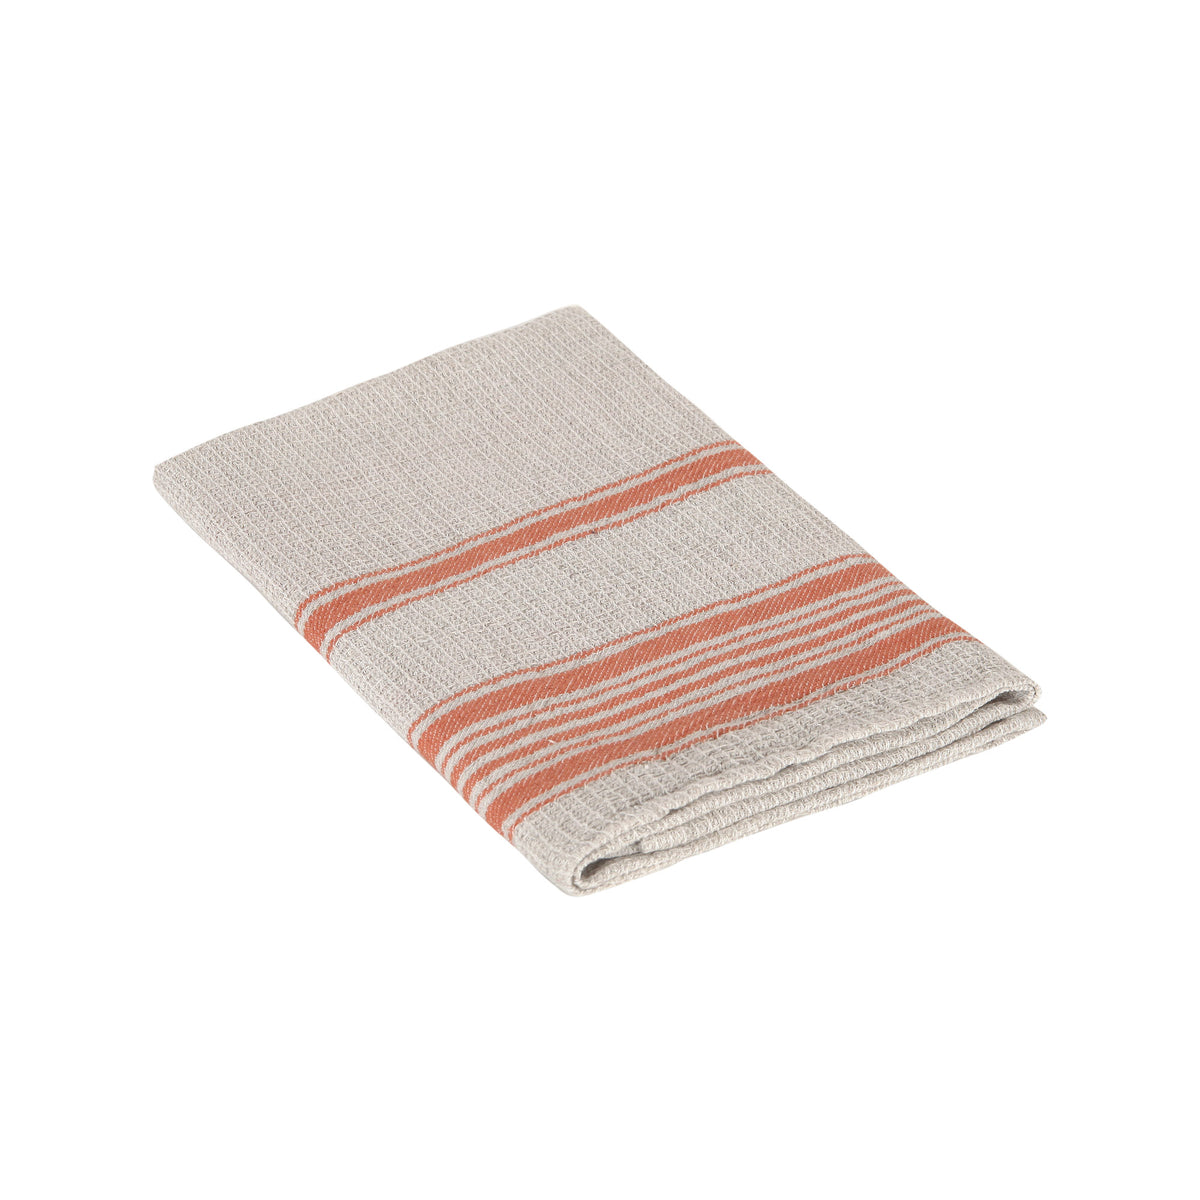 French Style Linen Towels, Farmhouse Striped Towels, Organic Linen Towels,  Heavy Weight Linen Towels, Rustic Linen Towels, Bath Towel Set. 